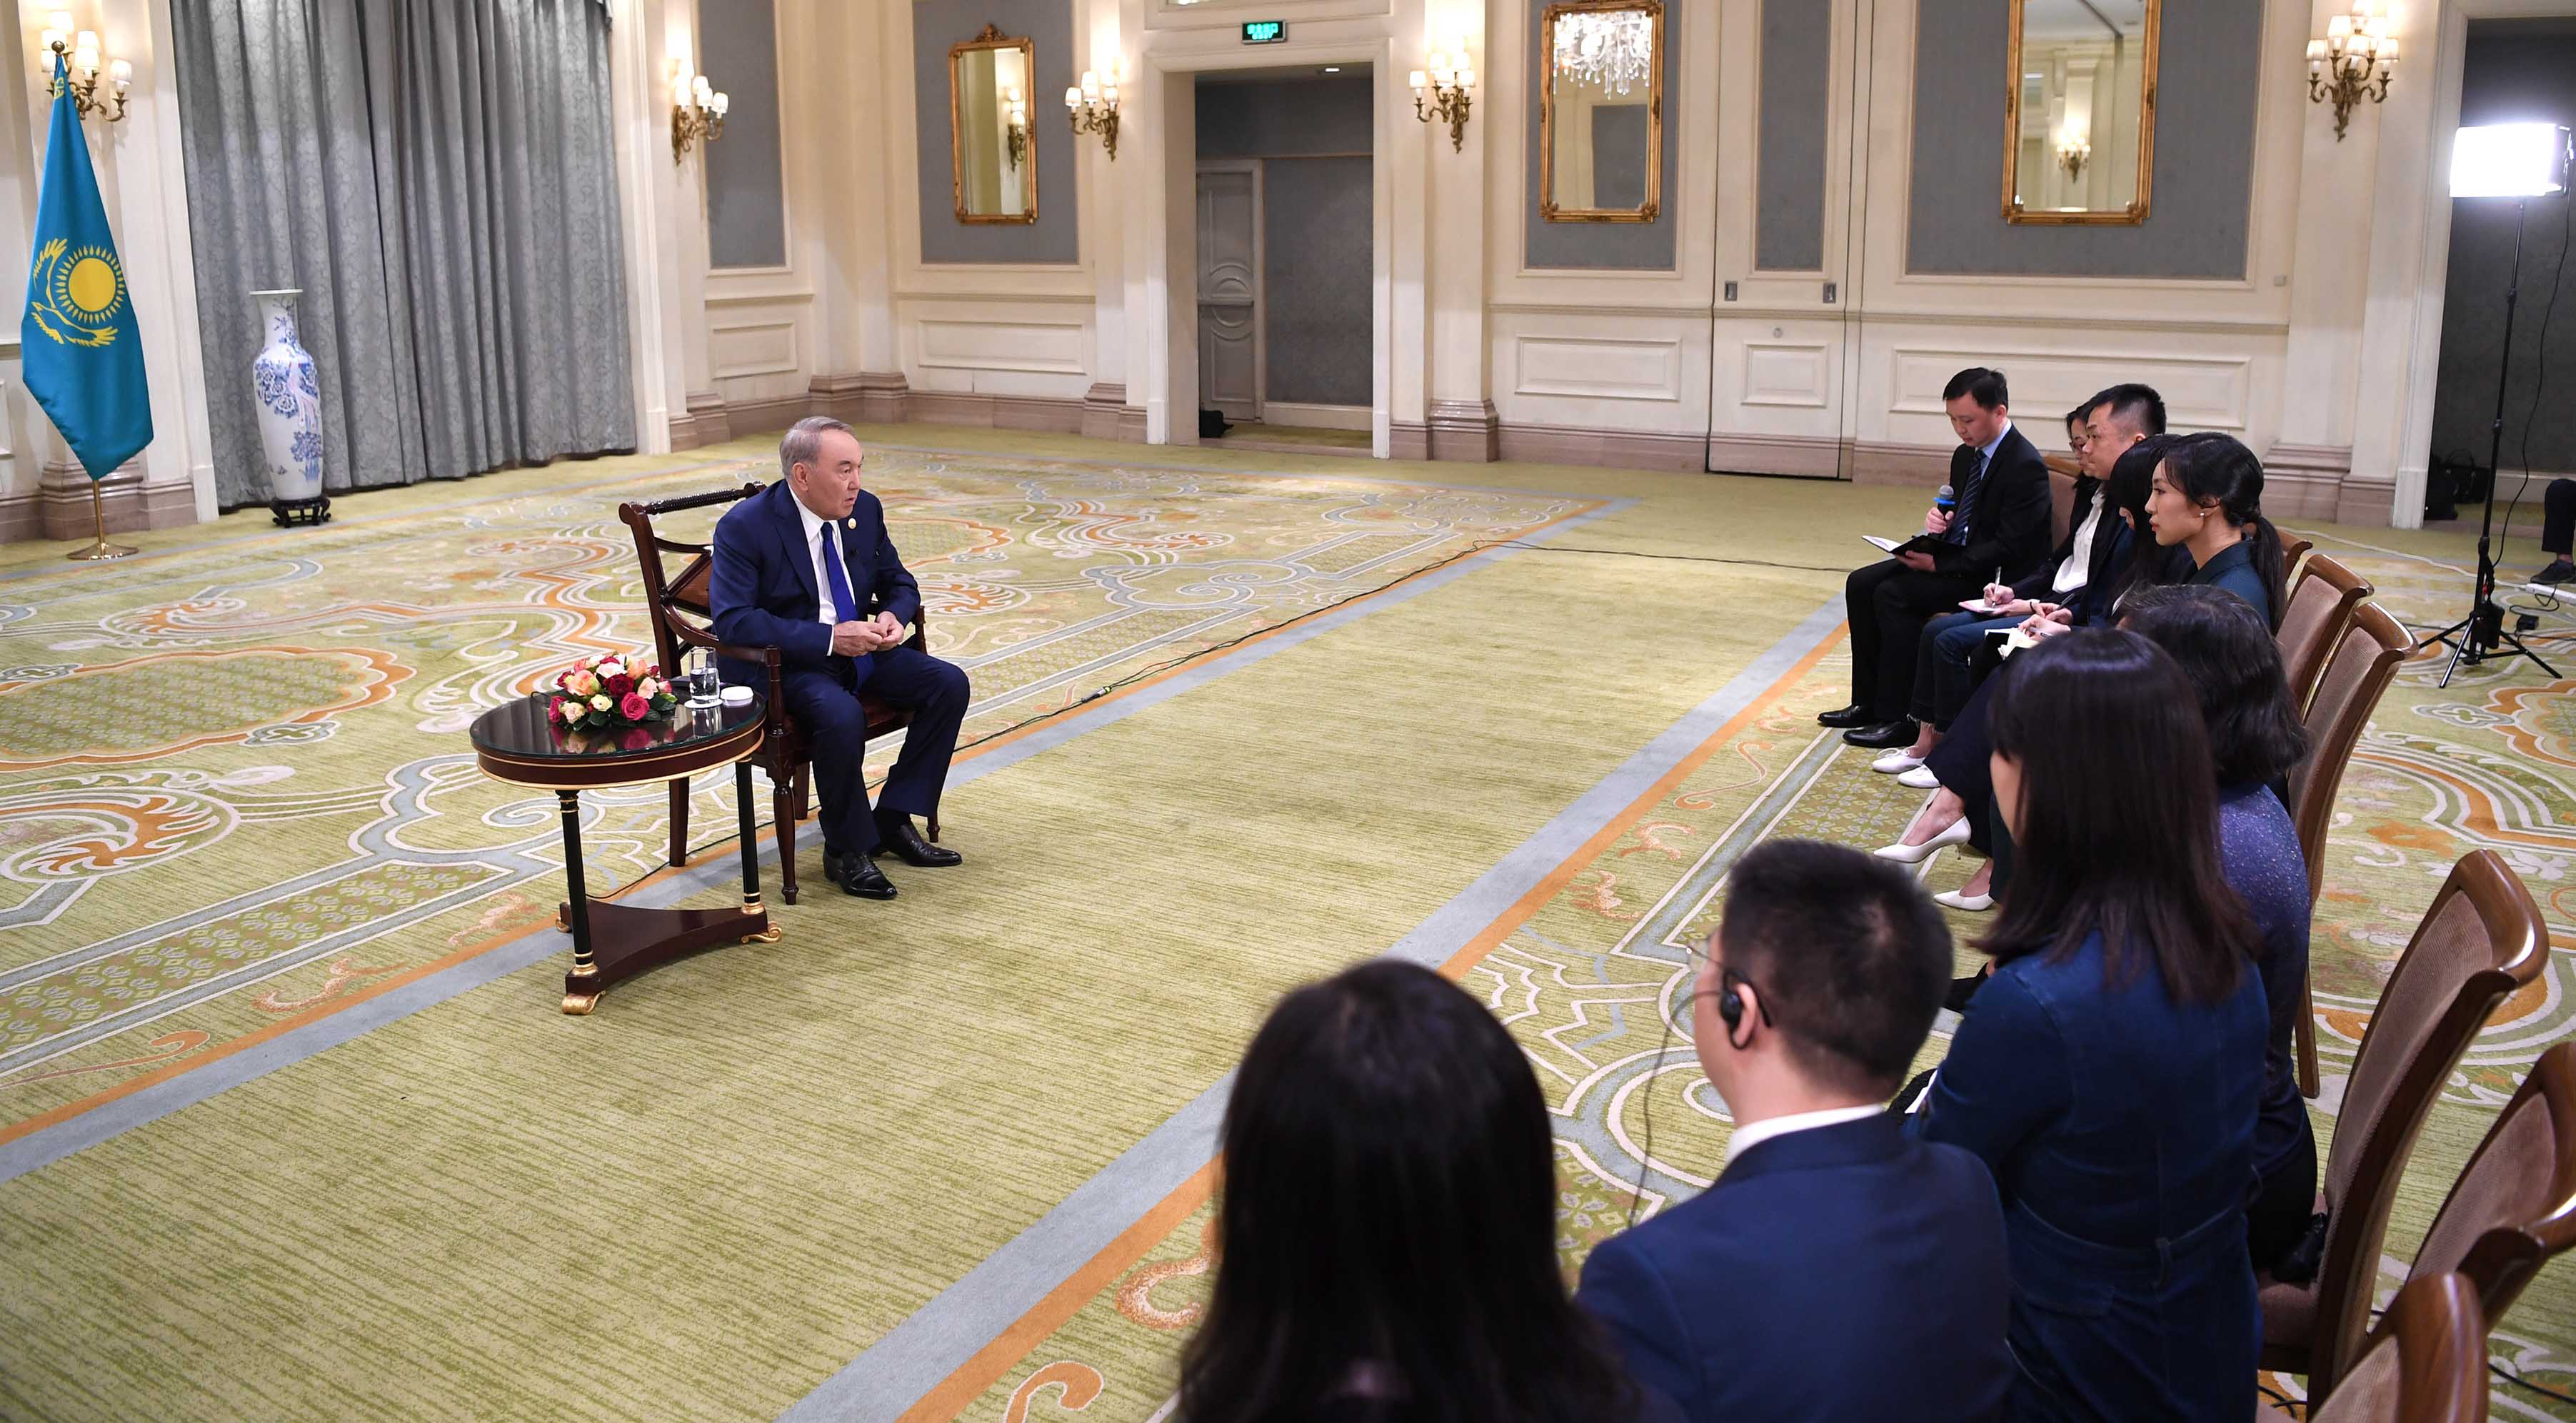 Nursultan Nazarbayev answered the questions of the Chinese media